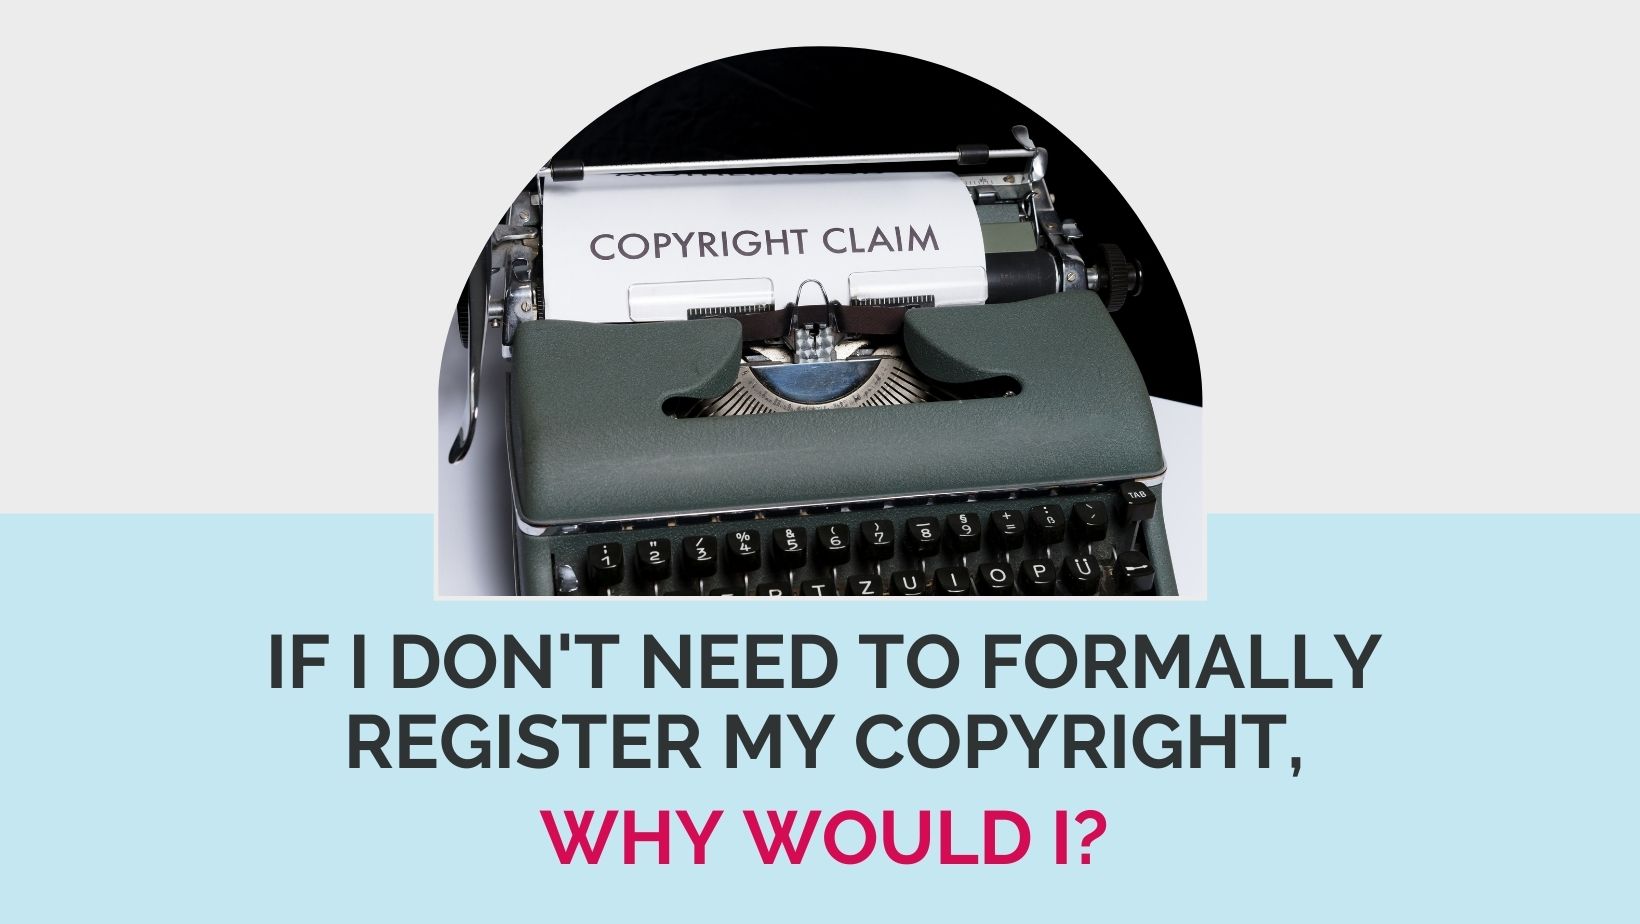 "If you don't need to formally copyright your children's book, why would you?" with a photo of a typewriter